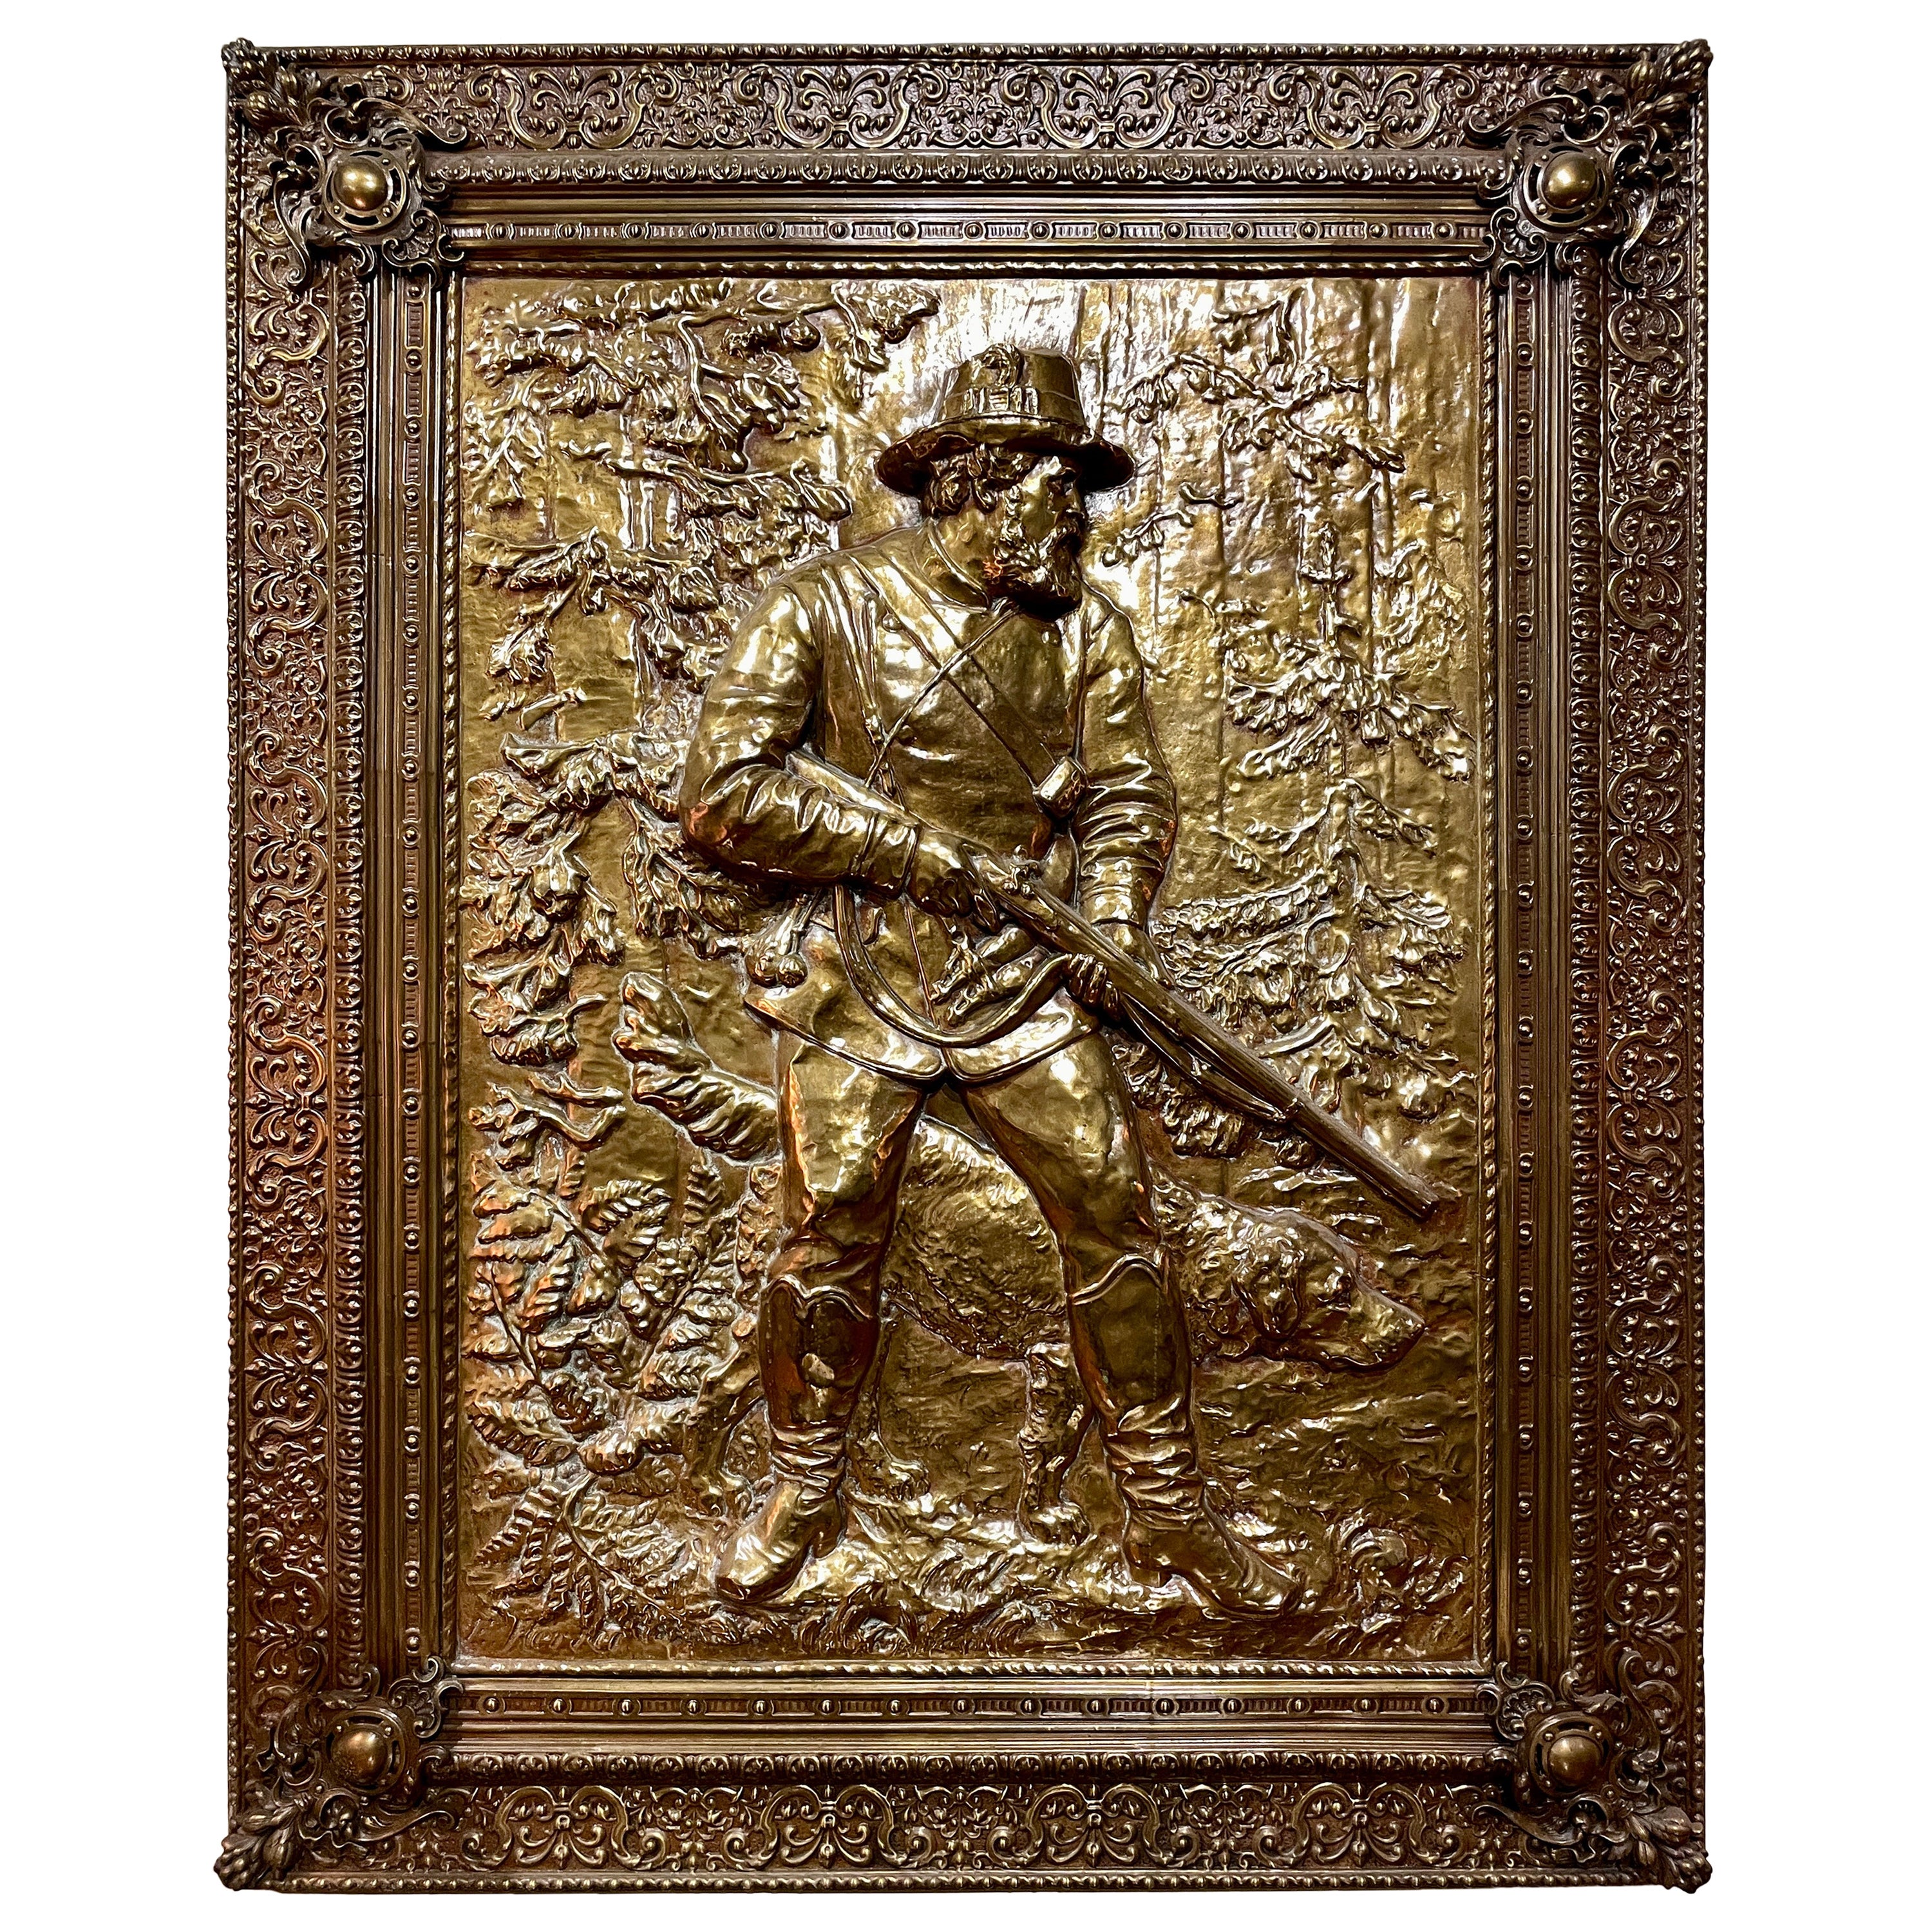 Antique 19th Century French Repoussé Brass Panel, "Hunter and His Dog"